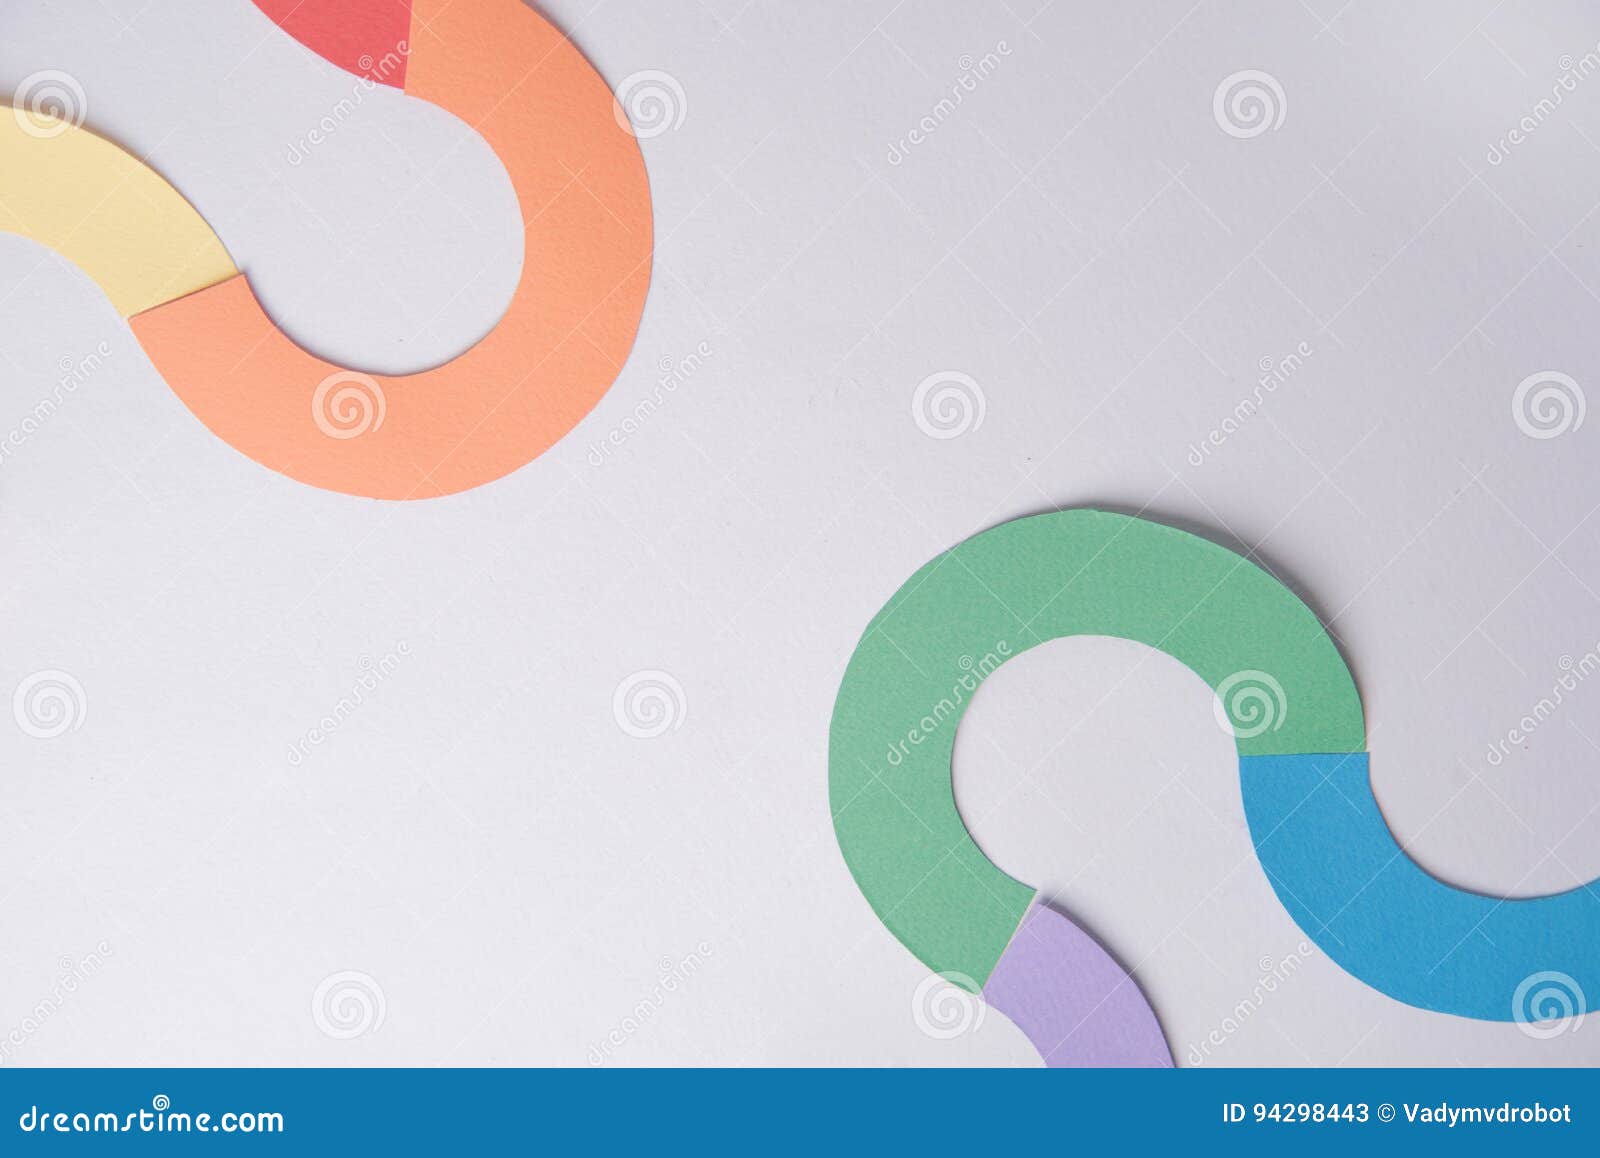 business graphics diagrama over grey table background.